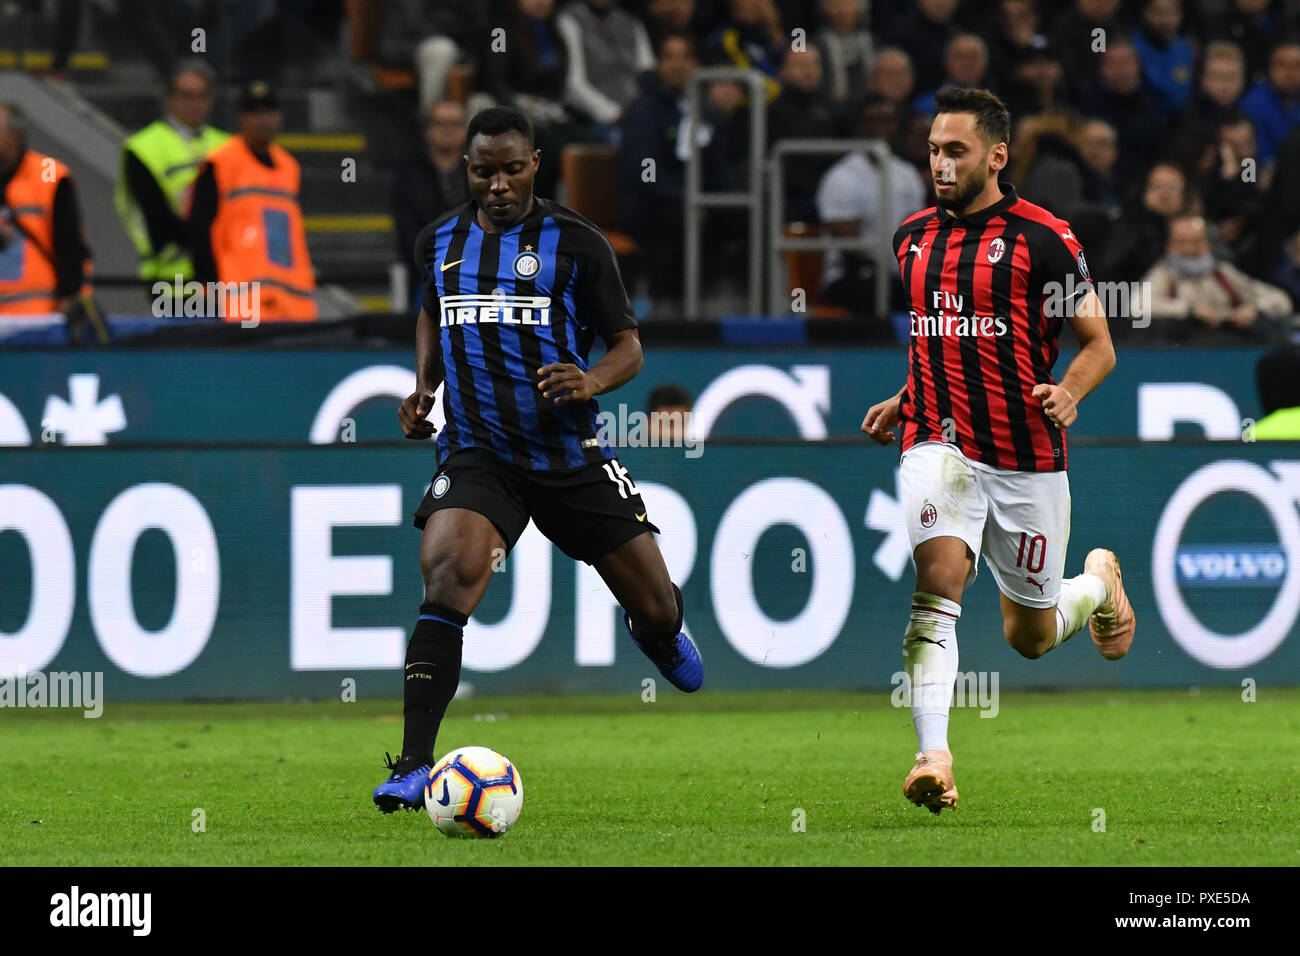 Milan, Italy. 21st October, 2018.  Kwadwo Asamoah of FC Internazionale in action during the Serie A match between FC Internazionale and AC Milan. Credit: Marco Canoniero/Alamy Live News Stock Photo